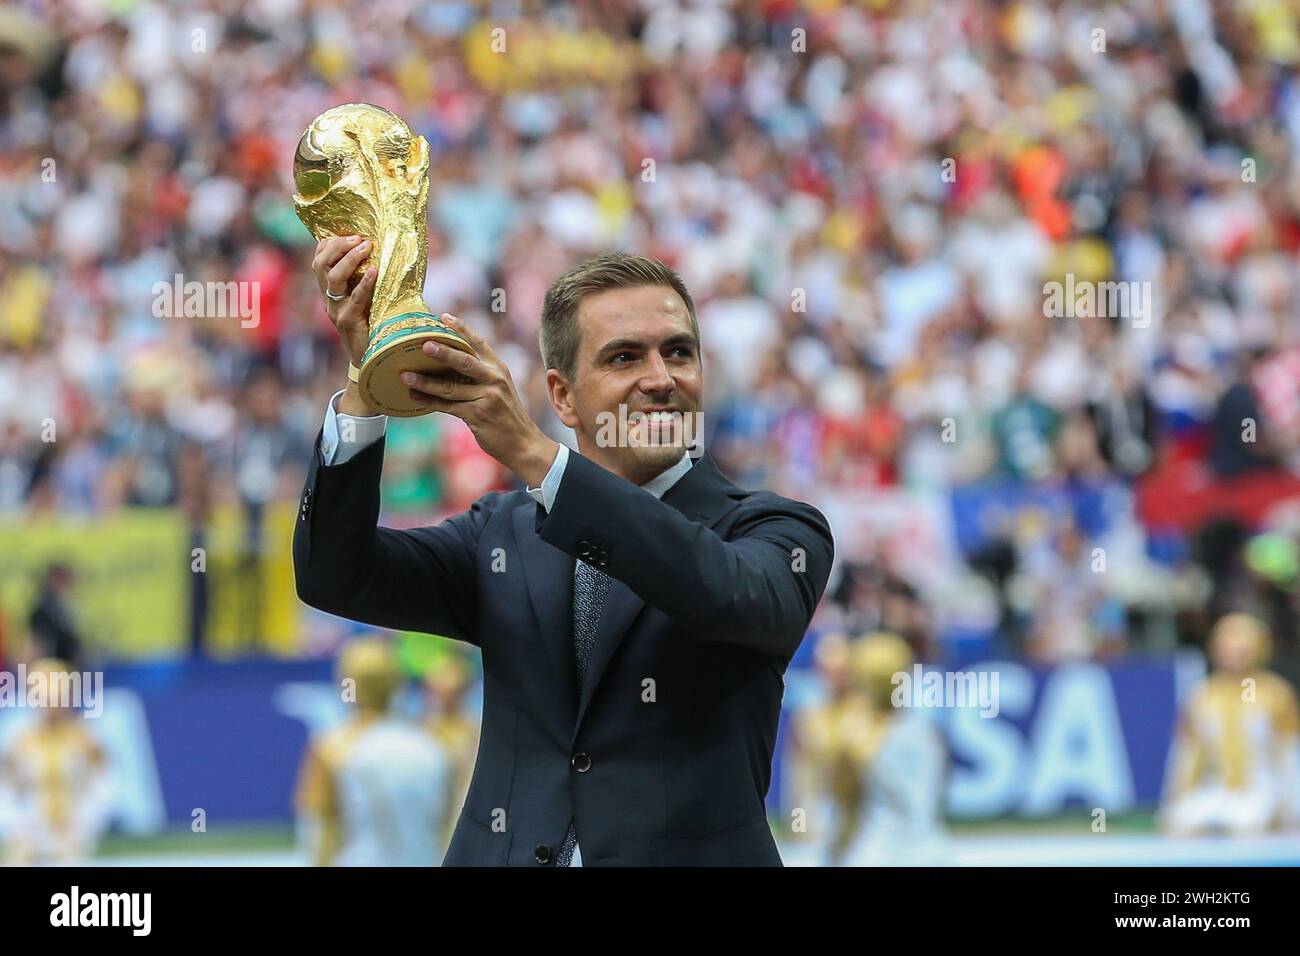 Moscow, Russia. 15th July, 2018. Philipp Lahm of Germany presents the world cup trophy during the FIFA World Cup 2018 Final match between France and Croatia at Luzhniki Stadium. Final score: France 4:2 Croatia. (Photo by Grzegorz Wajda/SOPA Images/Sipa USA) Credit: Sipa USA/Alamy Live News Stock Photo